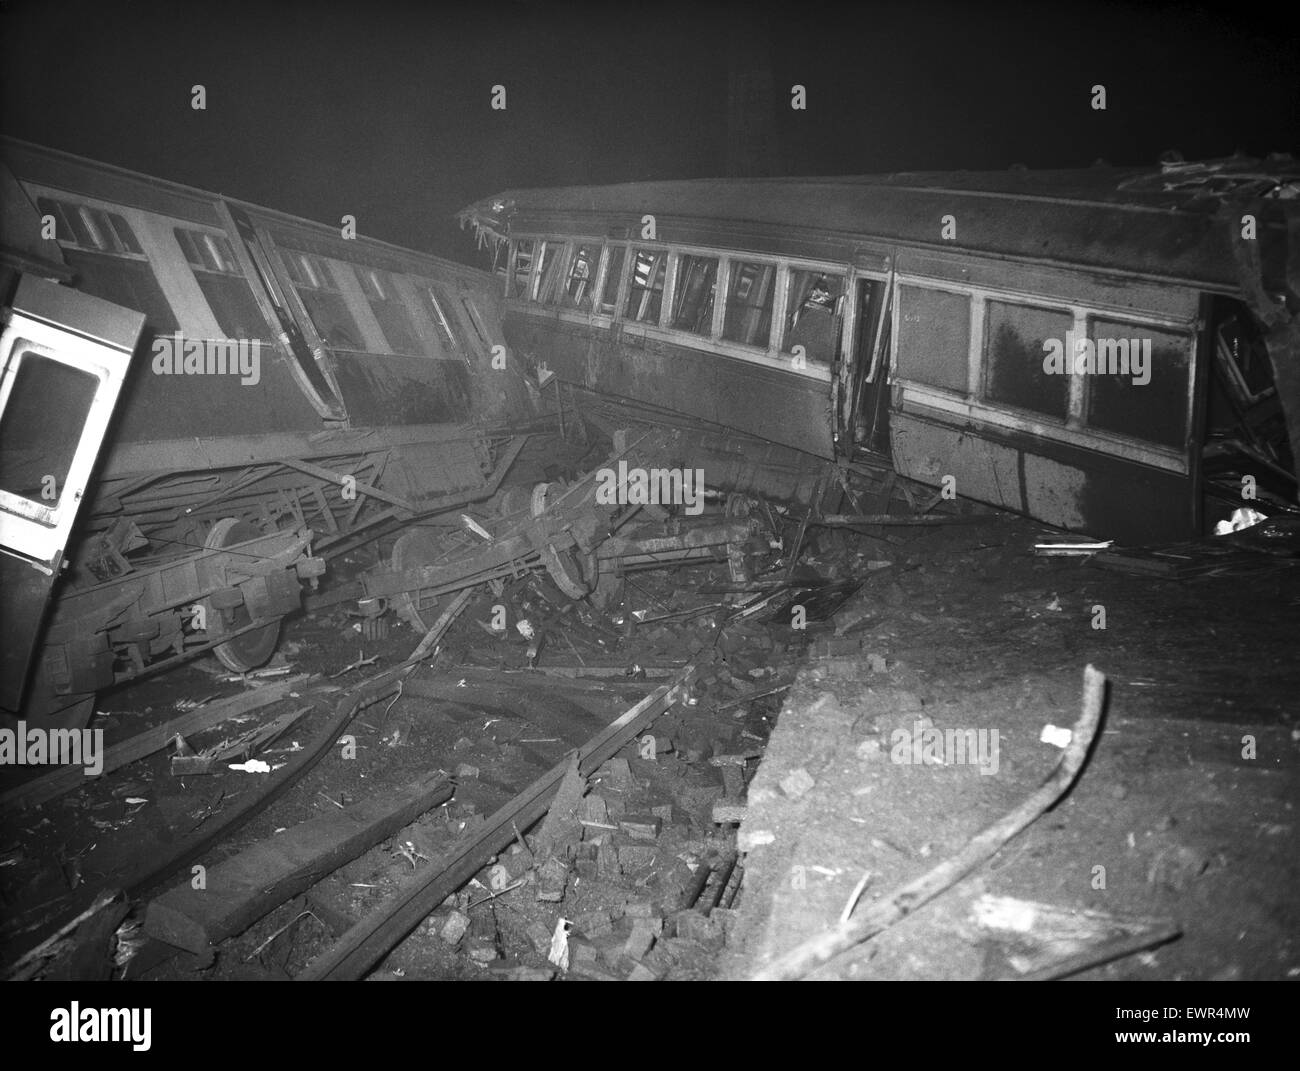 The Sutton Coldfield train crash, which took place on 23rd January 1955 in Sutton Coldfield. An express passenger train traveling from York to Bristol, derailed due to excessive speed on a sharp curve. 23rd January 1955. Stock Photo